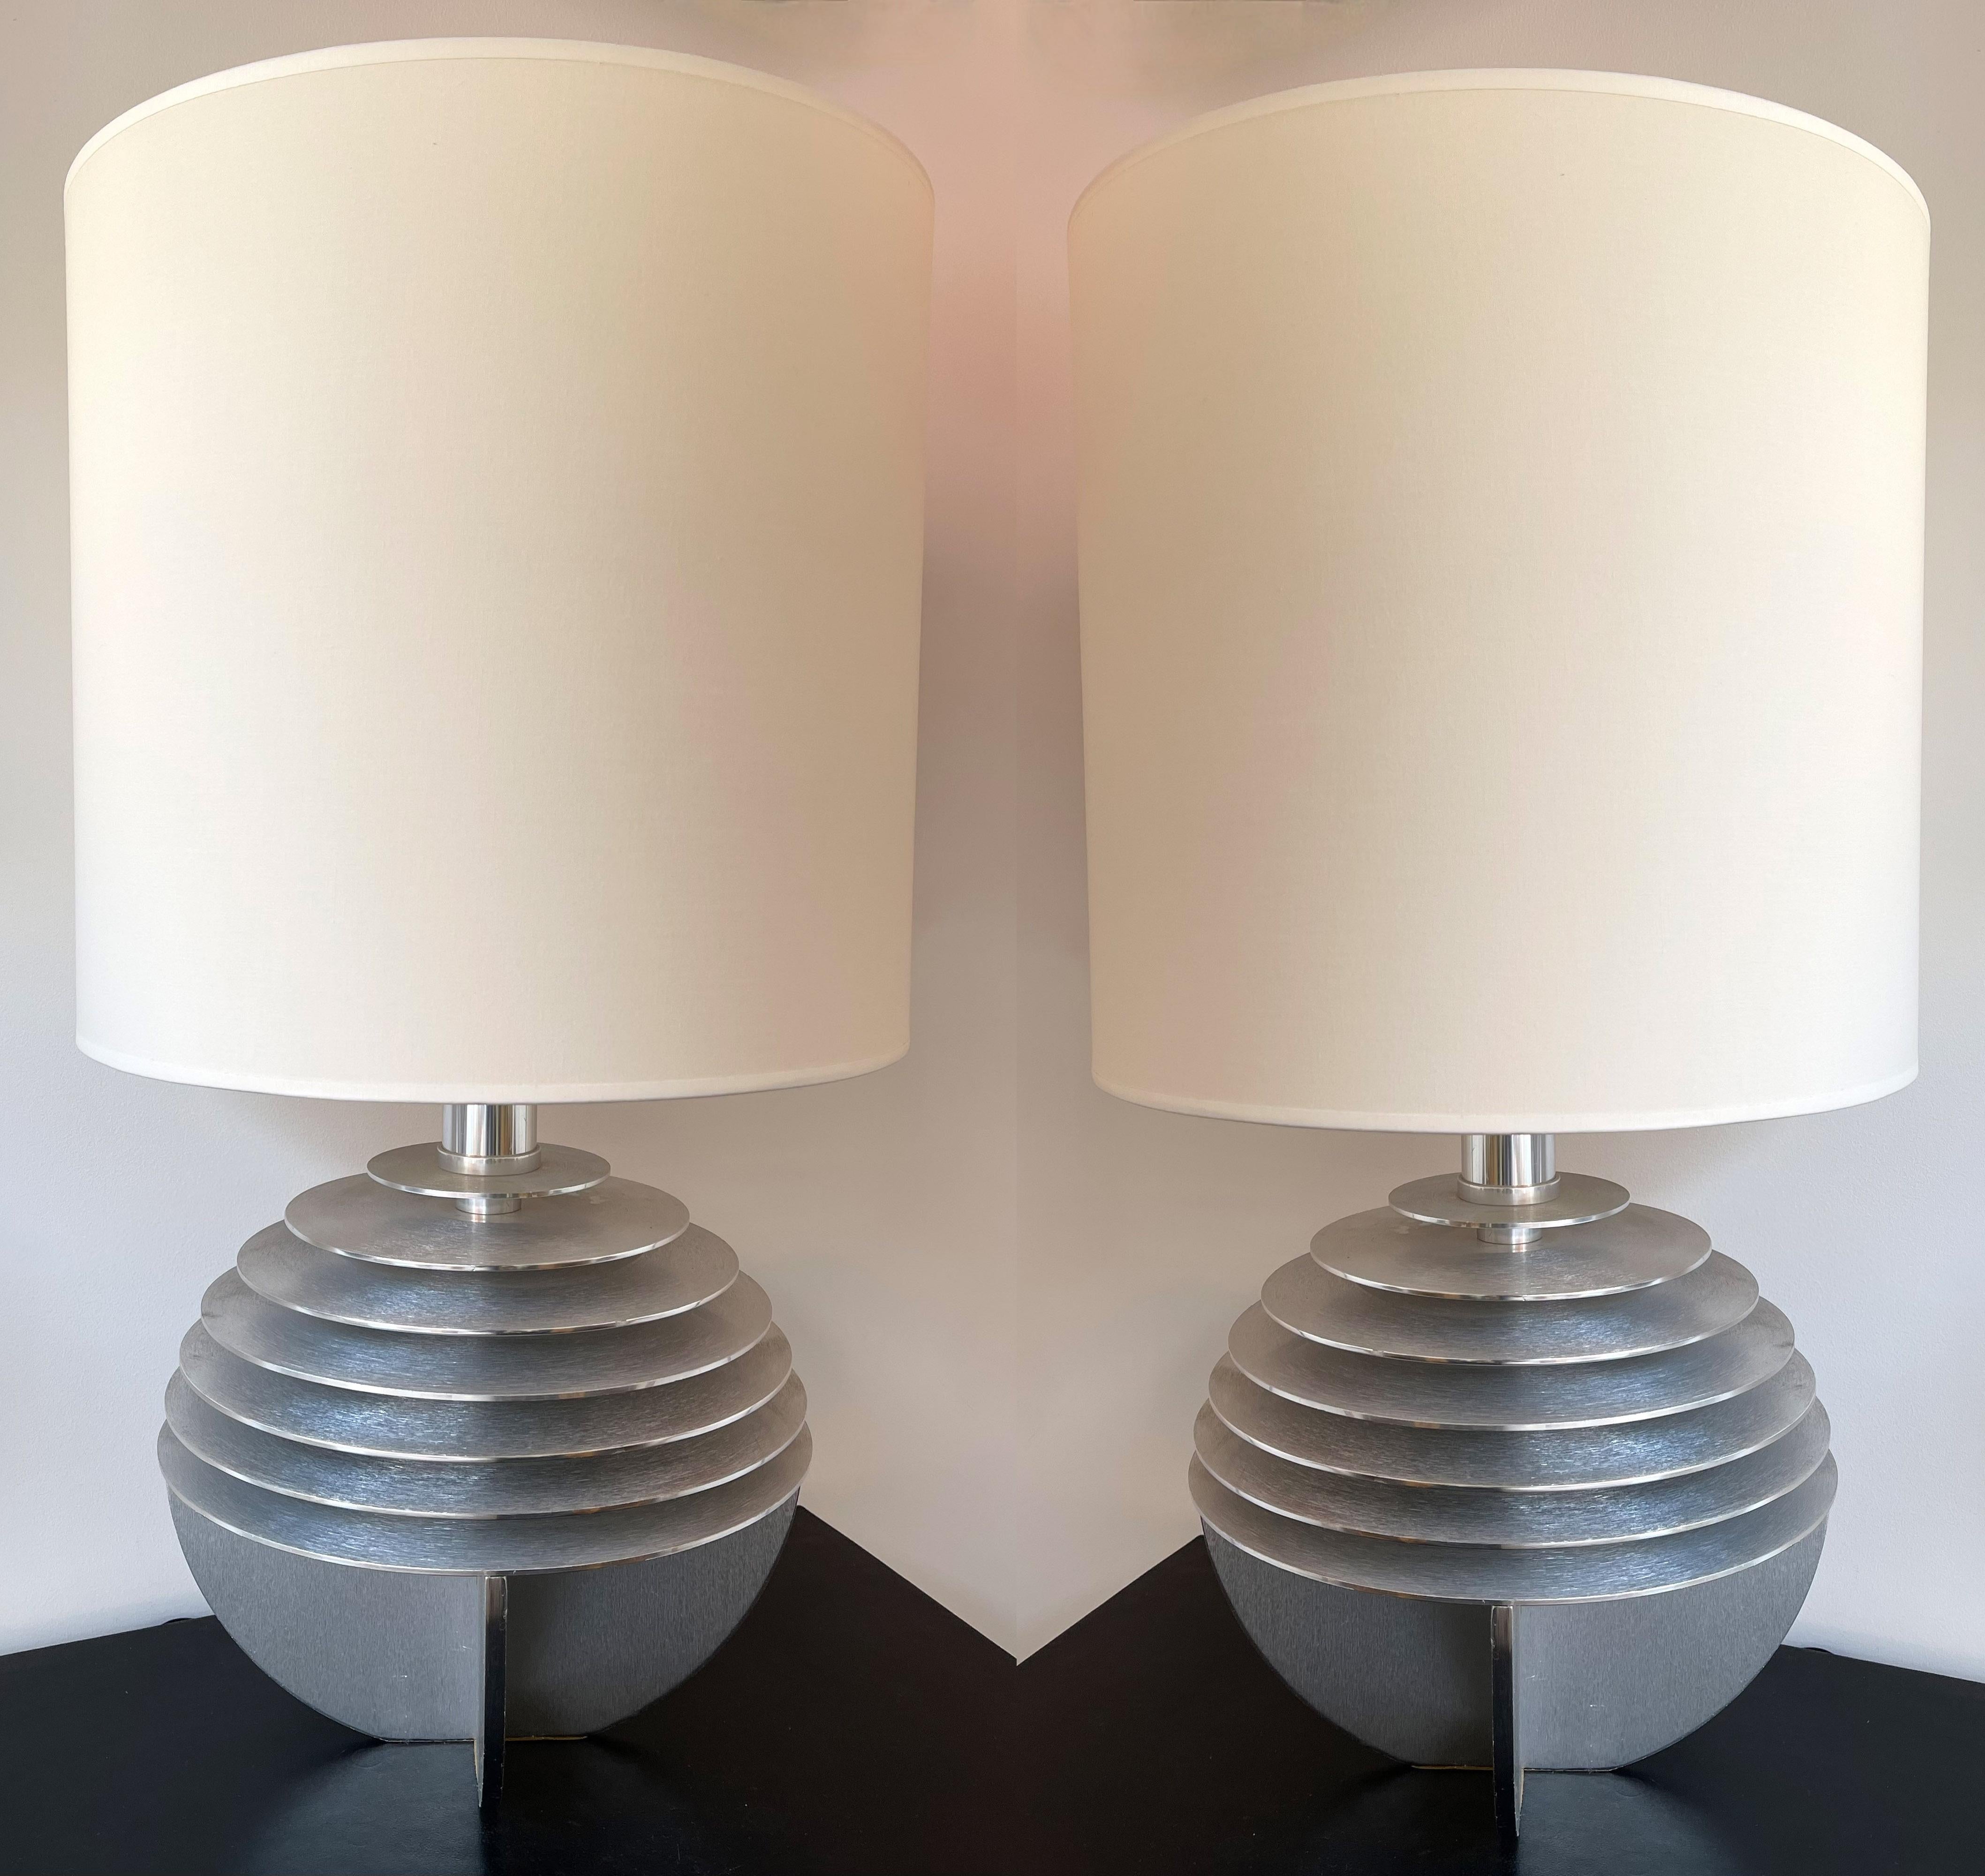 Pair of Metal Saturn Lamps by Banci, Italy, 1970s For Sale 5